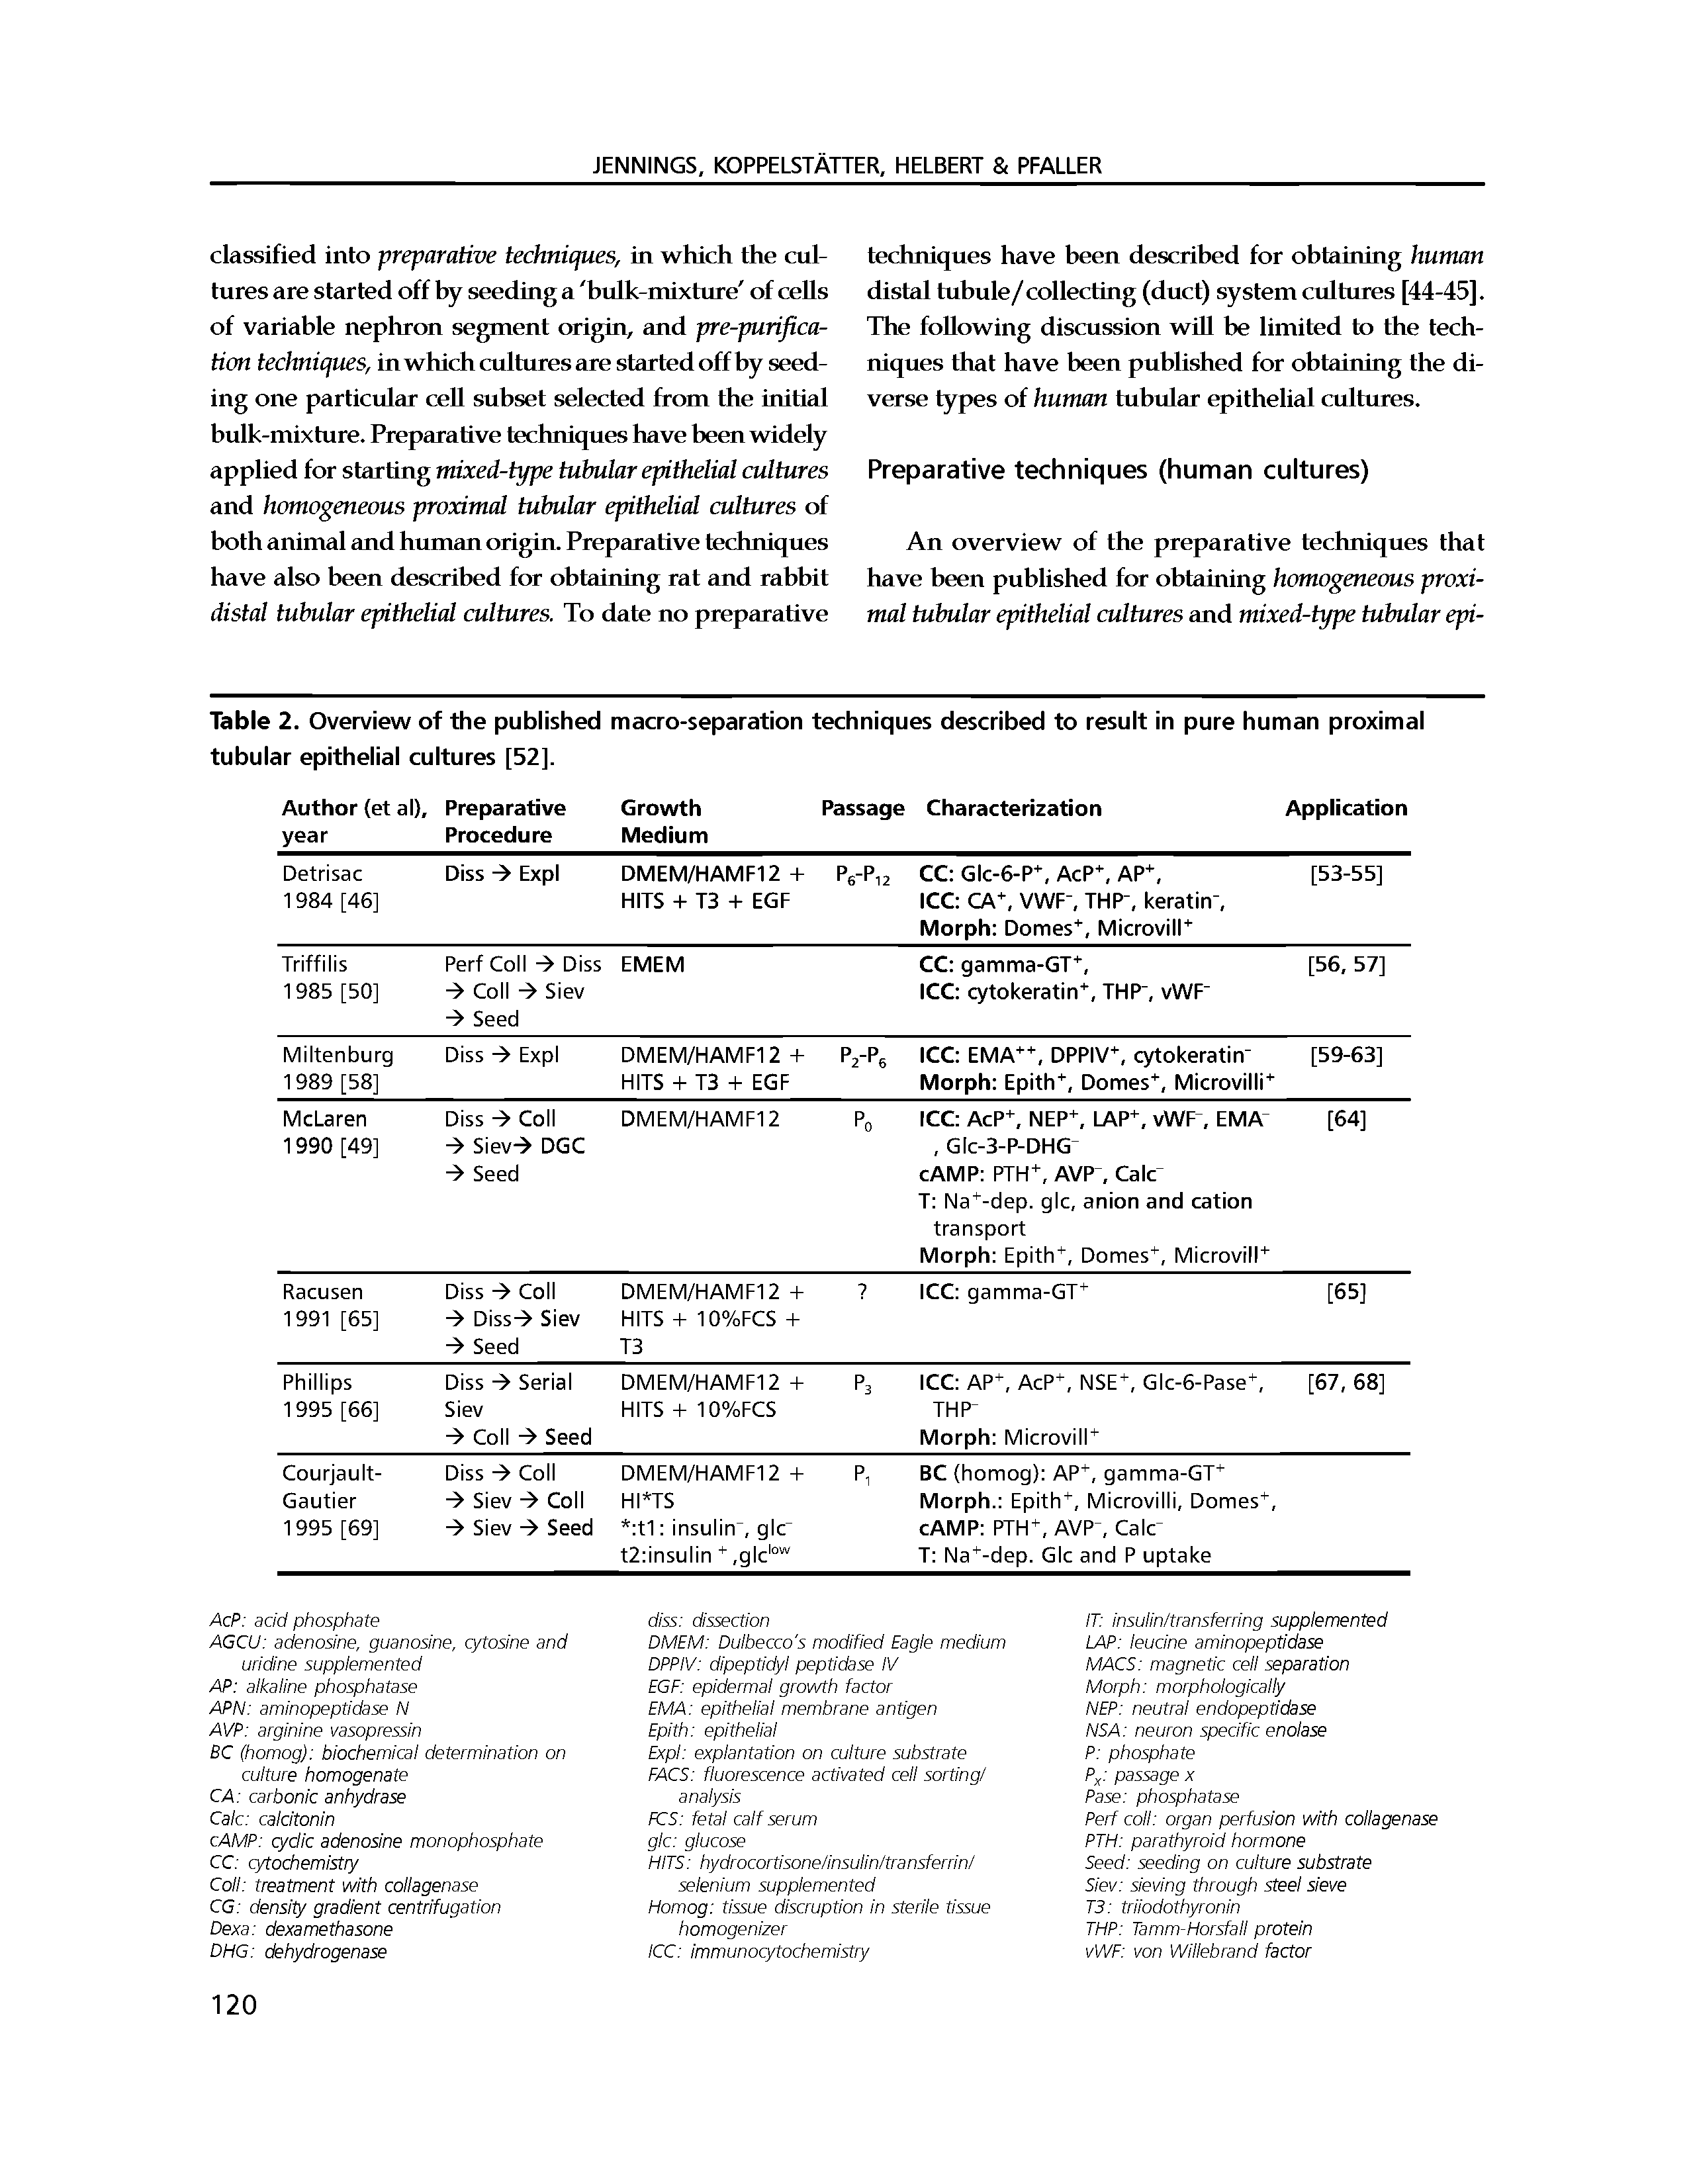 Table 2. Overview of the published macro-separation techniques described to result in pure human proximal tubular epithelial cultures [52],...